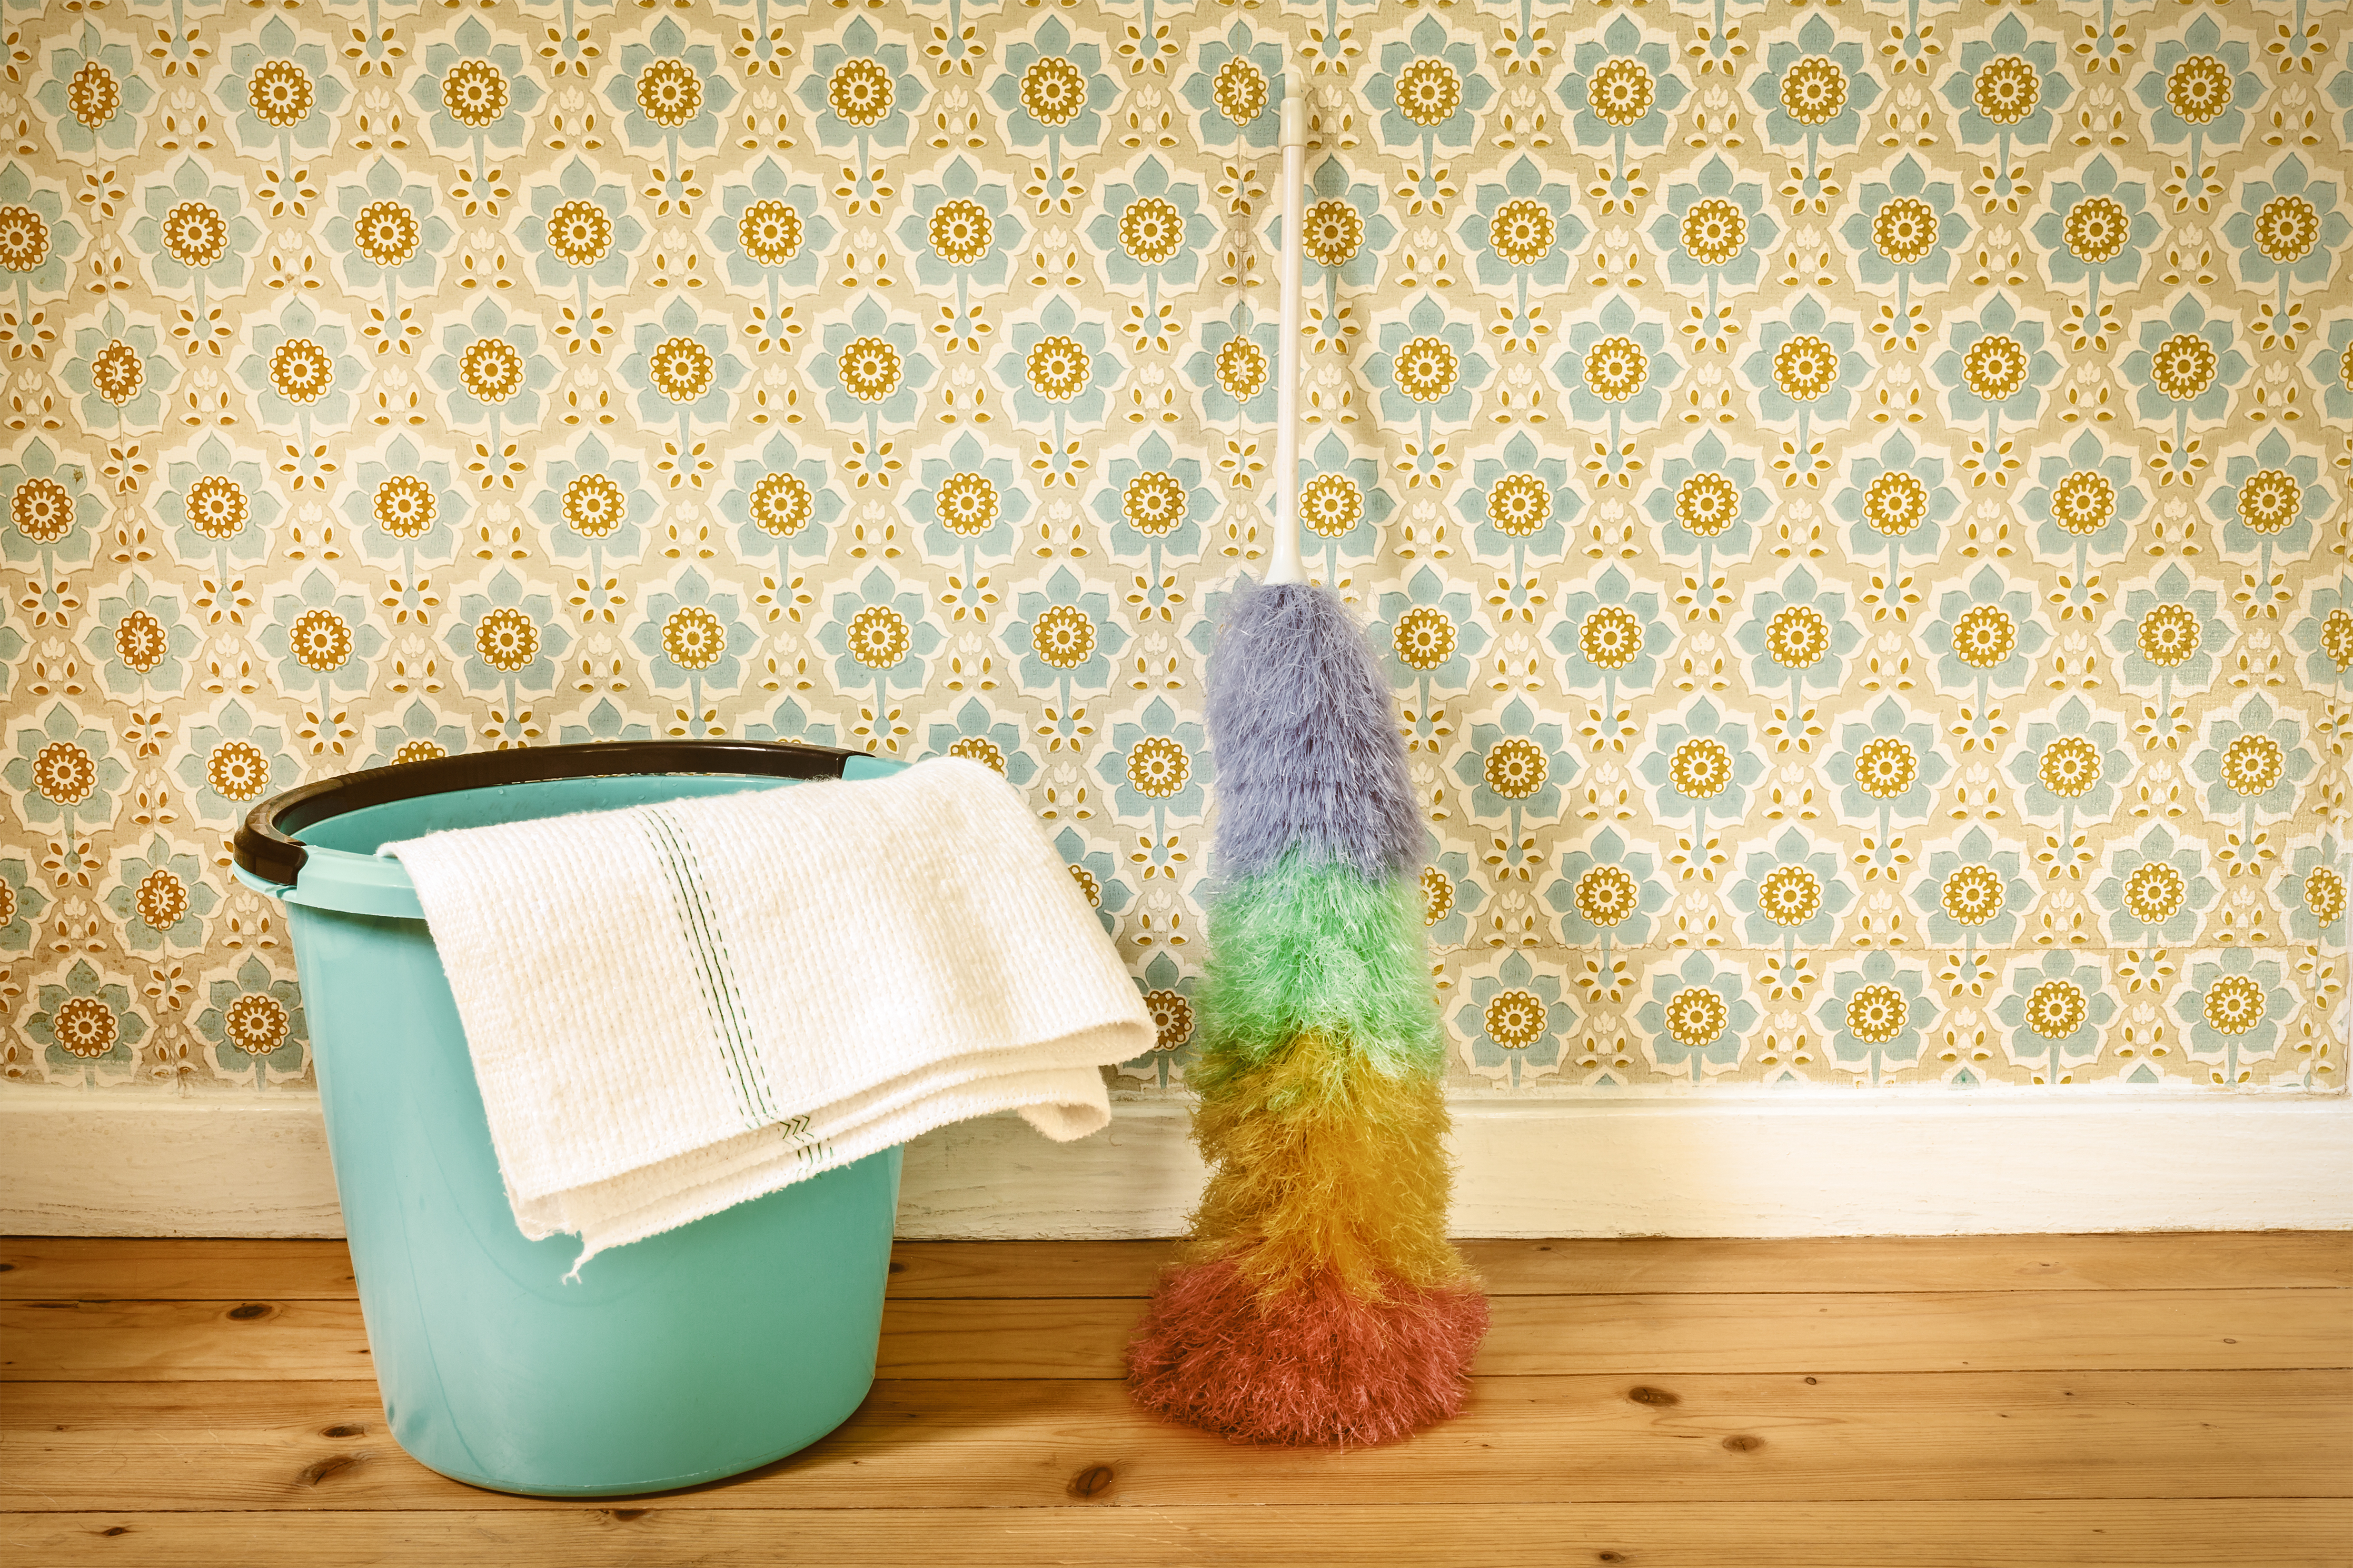 How to clean Kitchen wallpaper